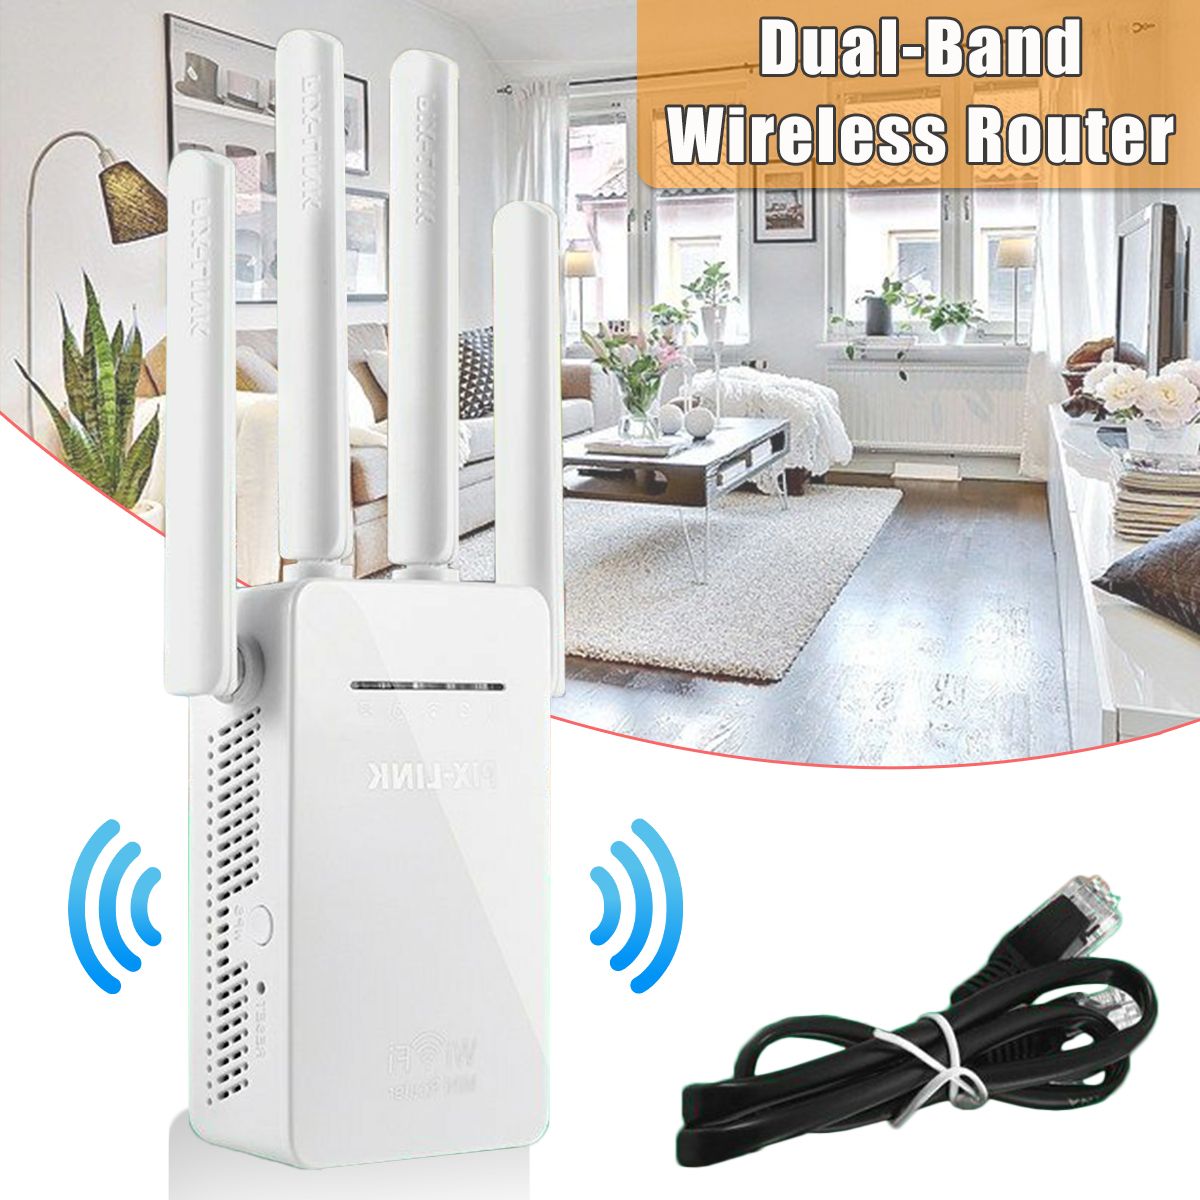 PIX-LINK-Dual-Band-Wifi-Extender-Repeater-Wireless-Router-Range-Network-Signal-Booster-WiFi-Outdoor--1621220